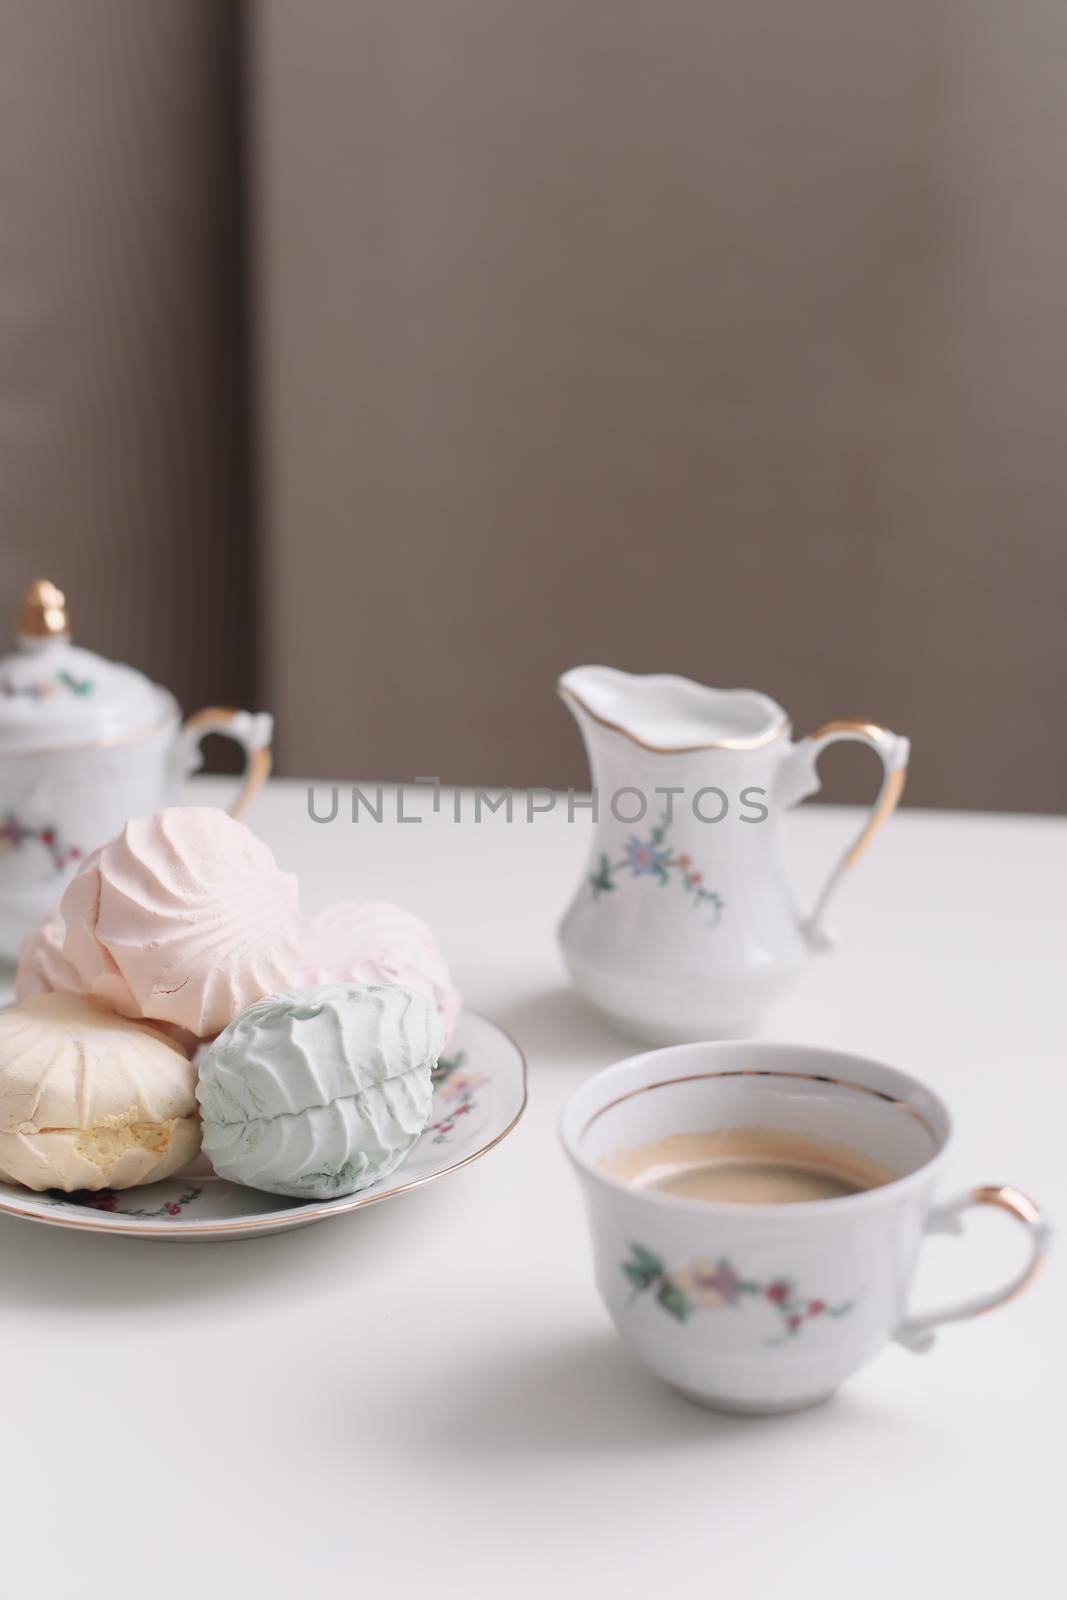 Good morning banner. Cup of coffee and homemade dessert zephyr. Top view. Food Photography with copy space. A cup of coffee and an airy marshmallow. Culinary background.